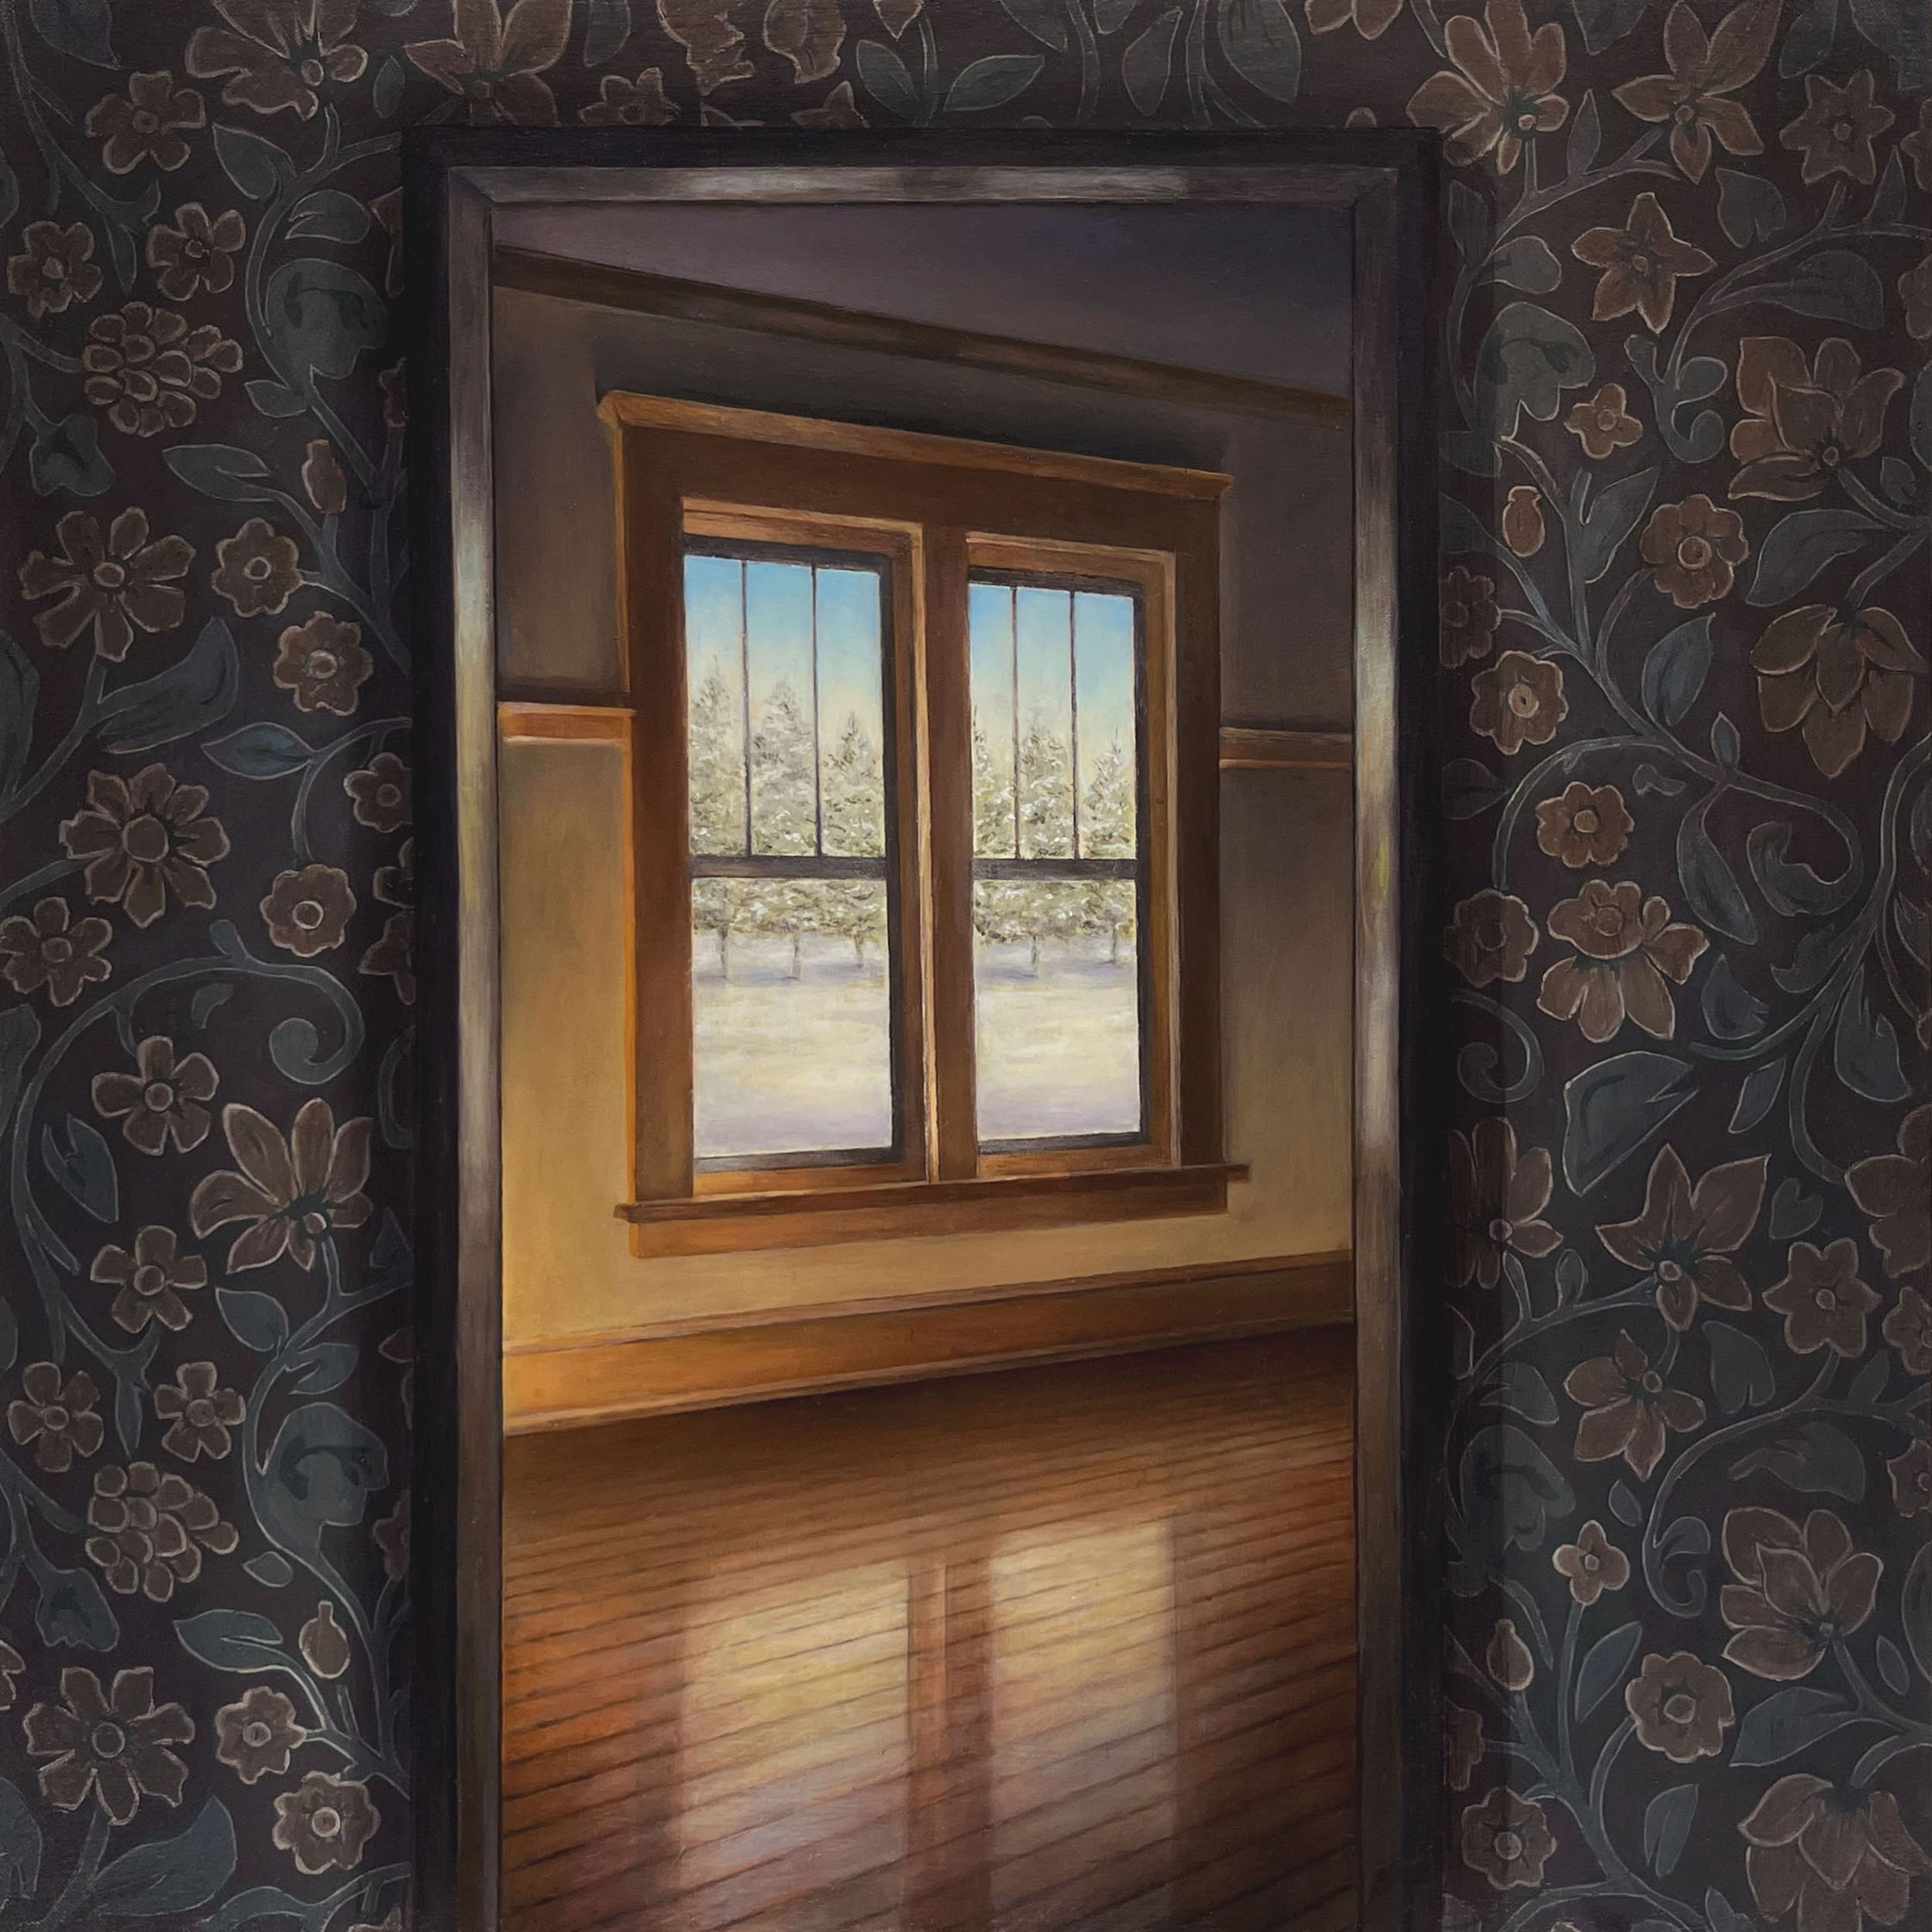   Window in the Mirror - Winter   2023  Oil on linen over panel  16 x 16 inches   